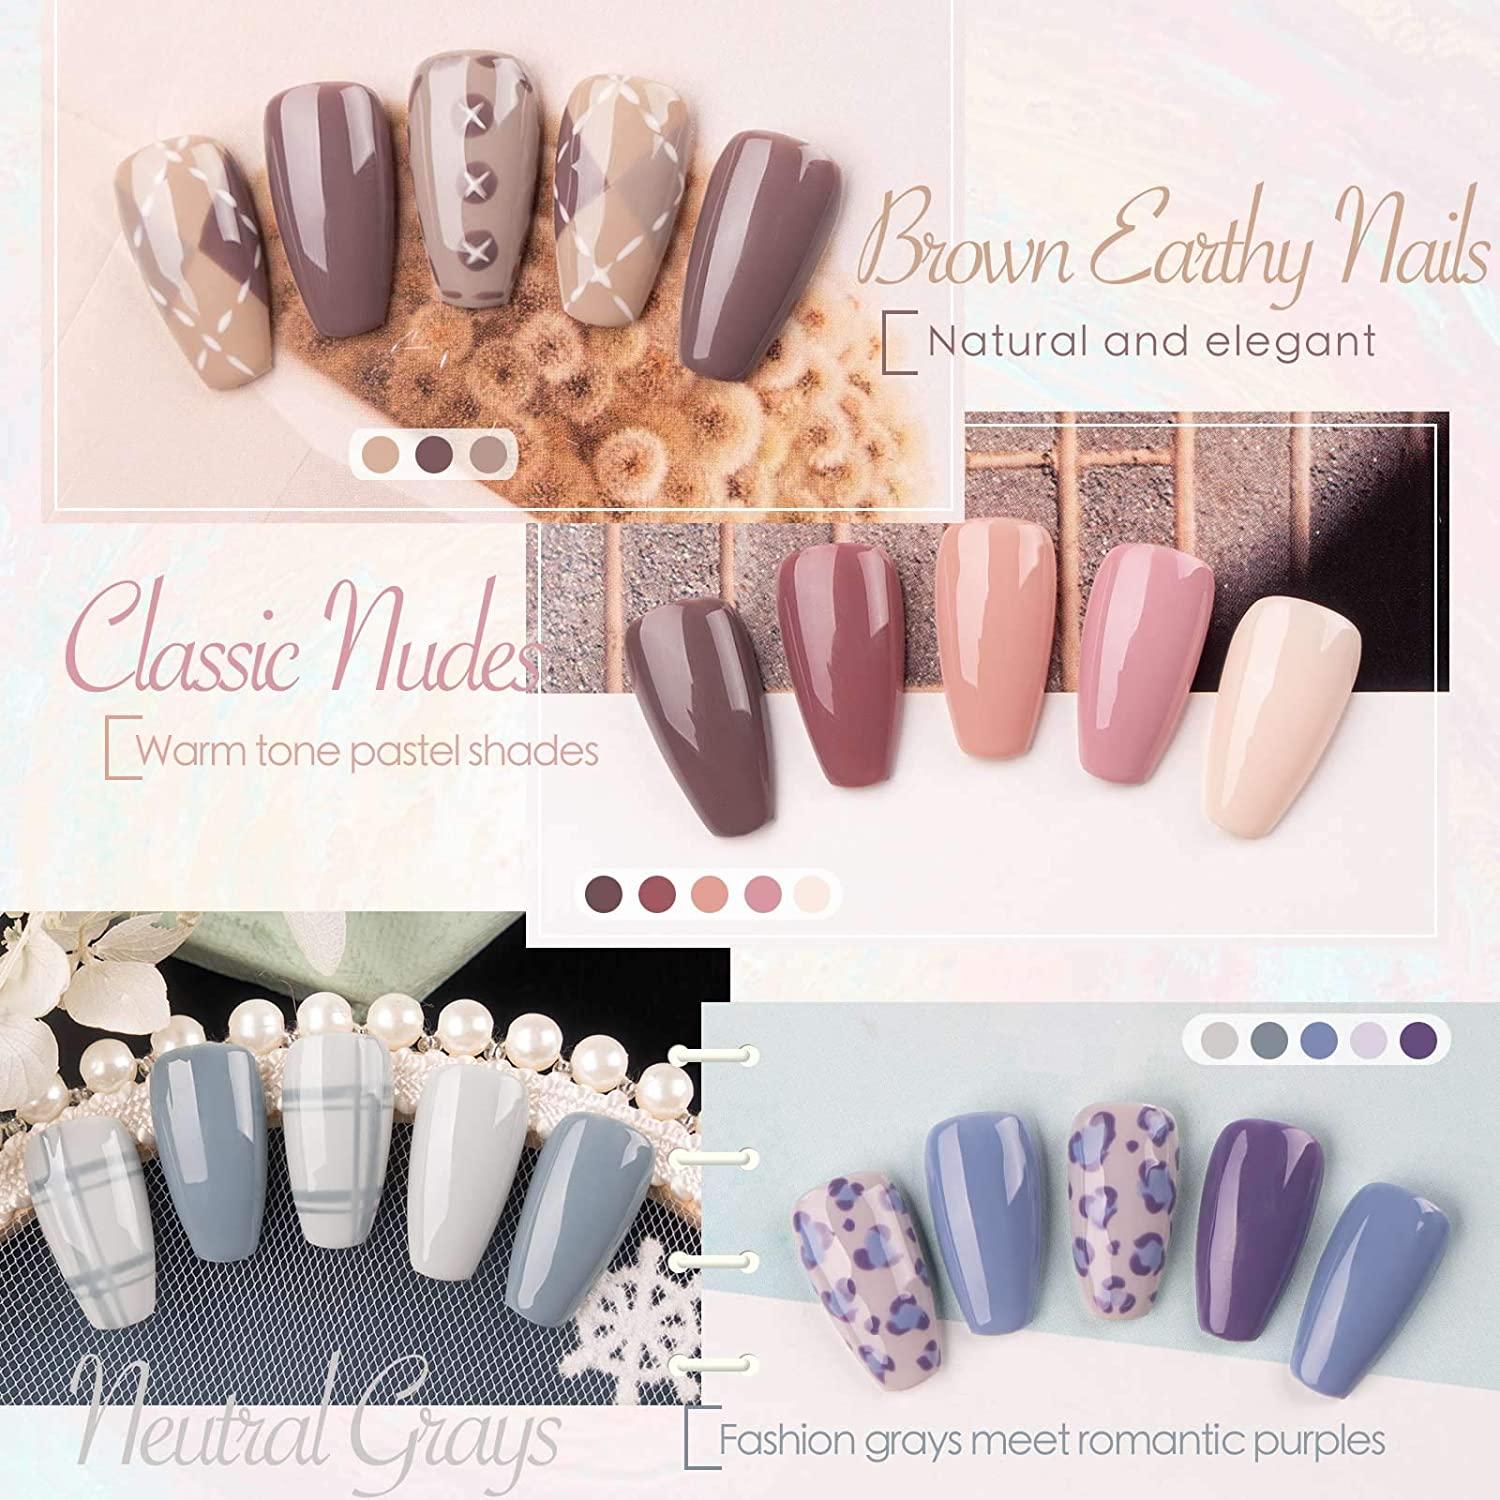 Get Trendy Nails with our 2-Piece Matte Nail Polish Set - Order Now!